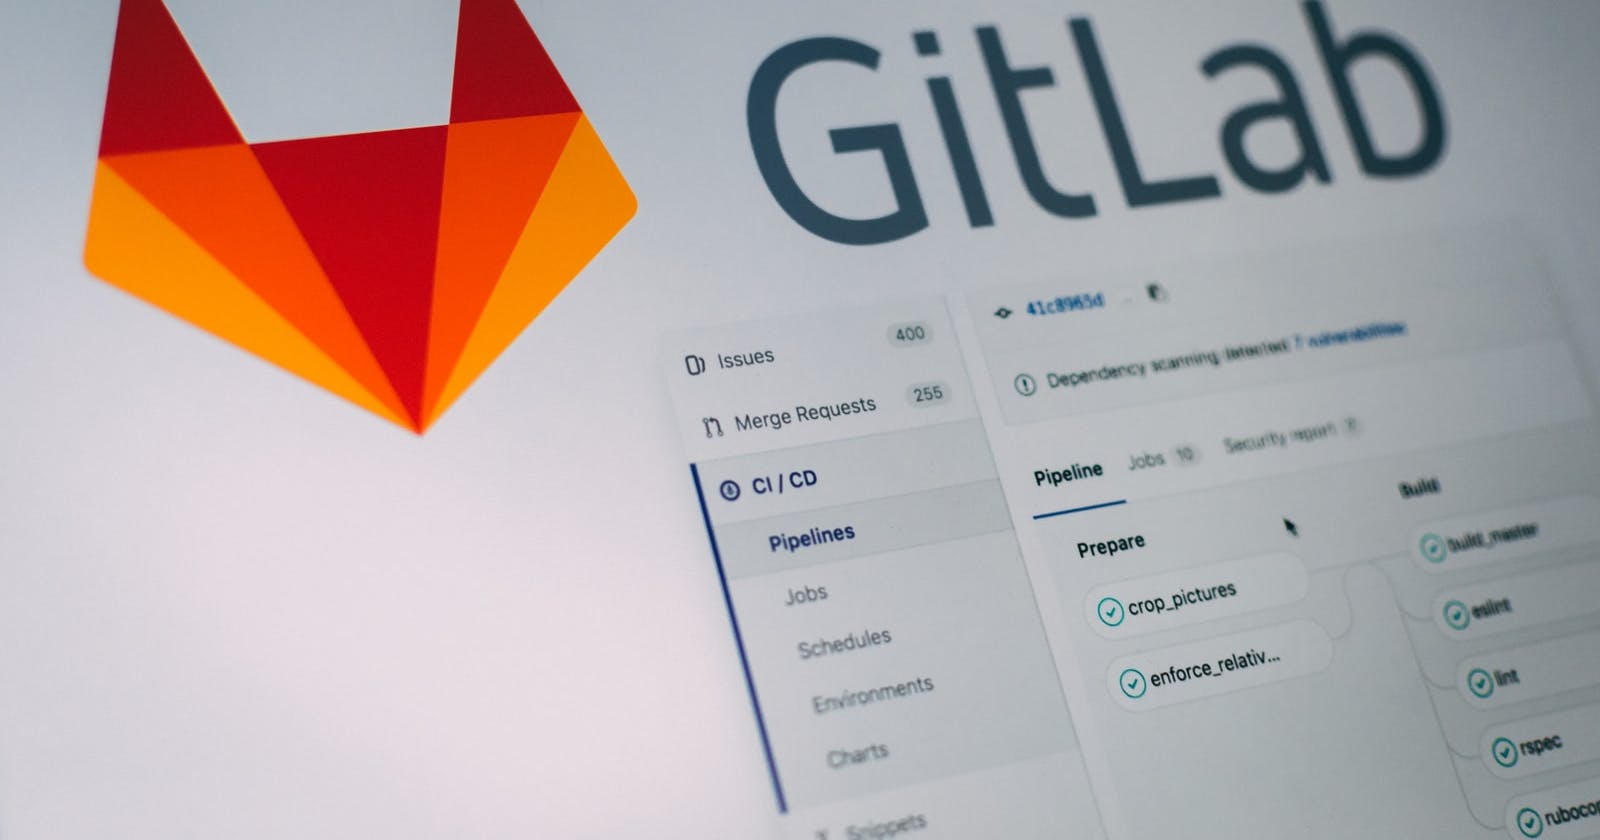 GitLab introducing Free tier user limit